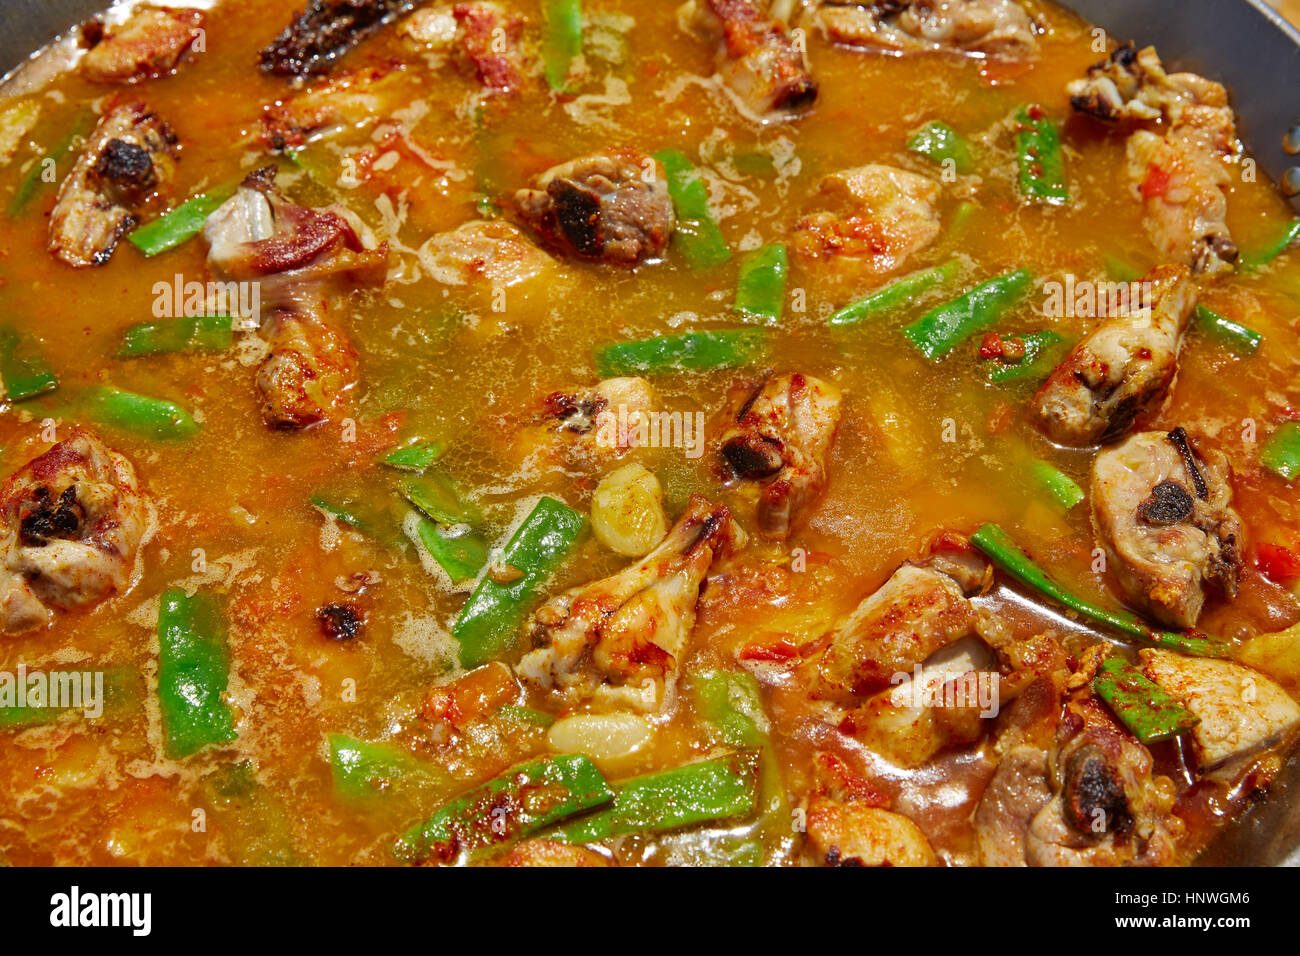 Paella from Spain recipe process ad water to get the broth boil Stock Photo